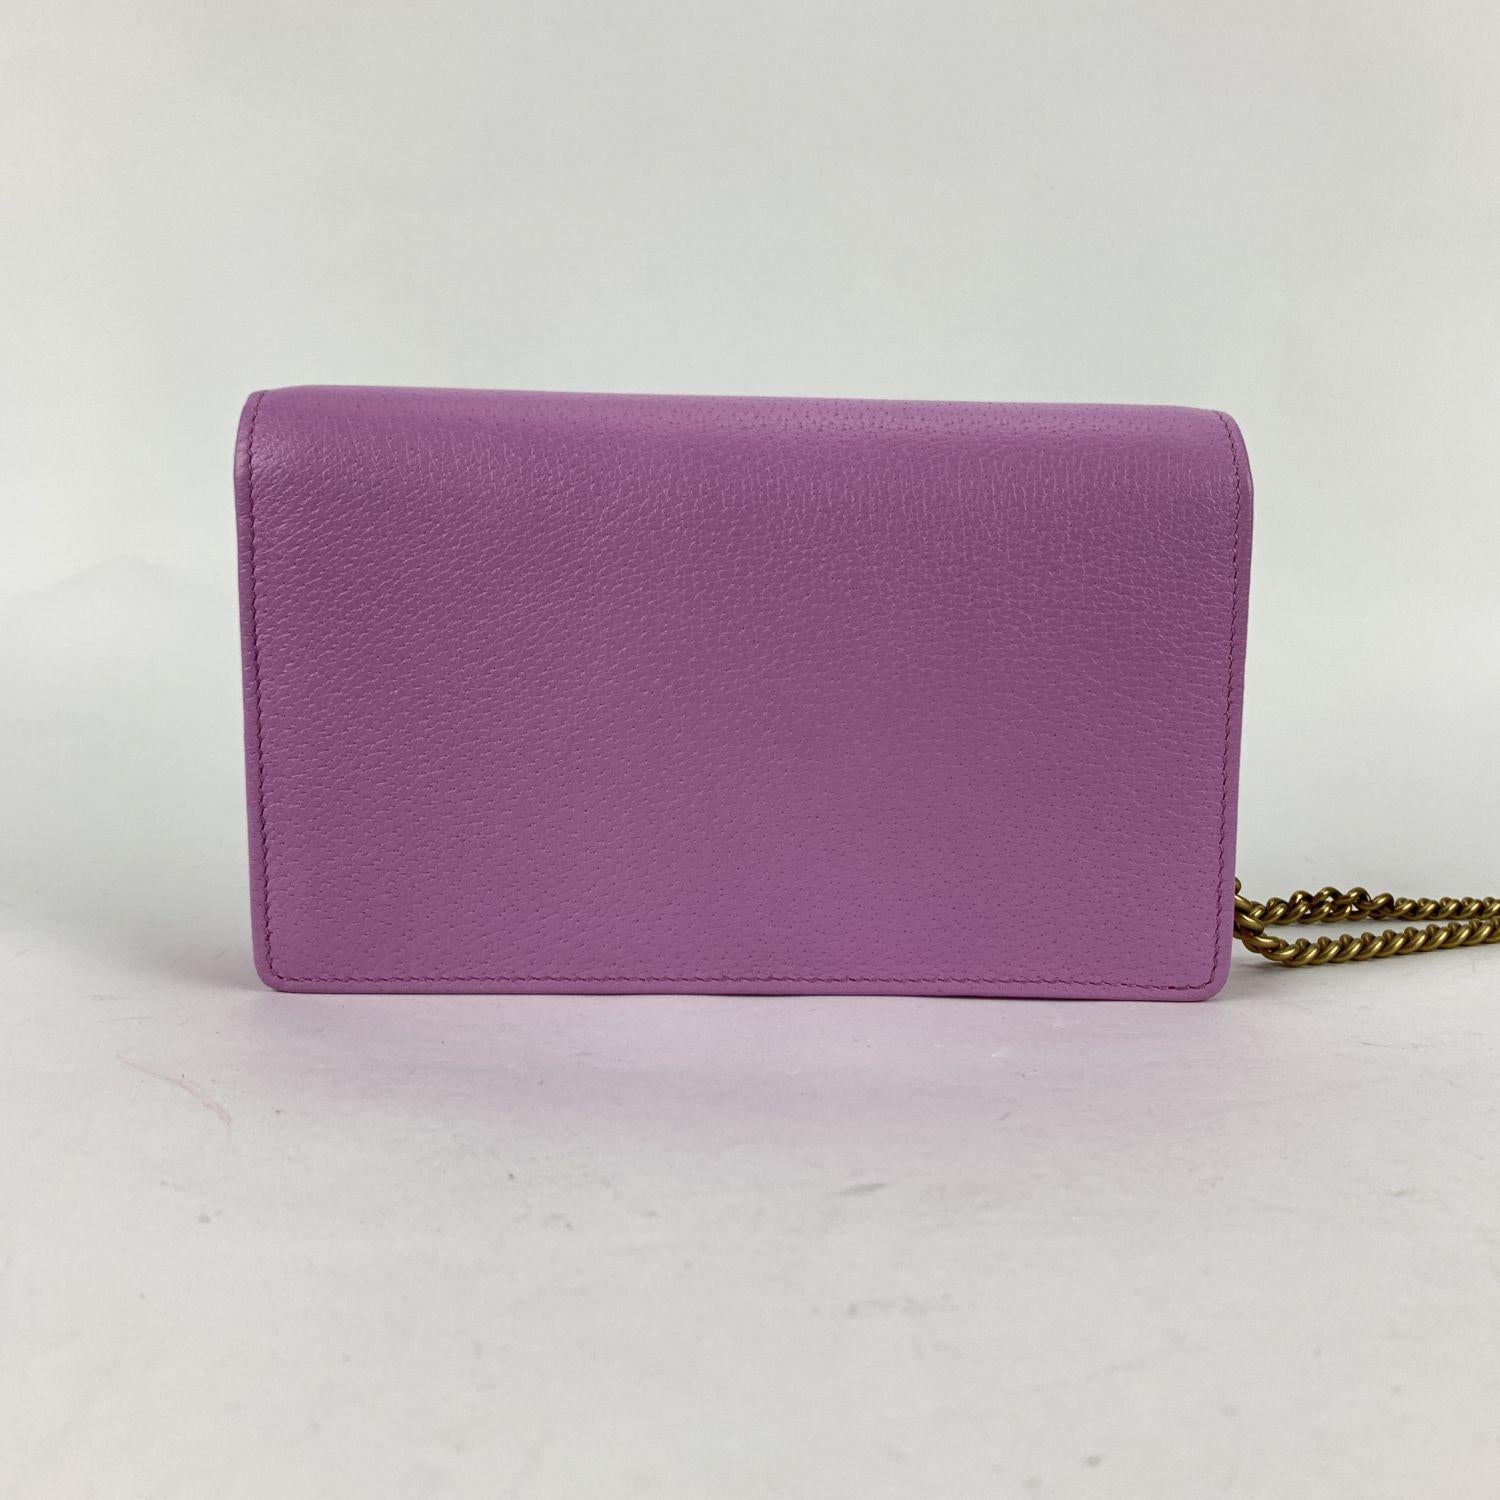 Beautiful Gucci Mini Double G GG Marmont Wallet on Chain in pink leather embellished with crystals. The bag features a flap with button closure, built-in mirror on the reverse of the flap and 1 slit pocket under the flap. Black nylon lining. 1 side